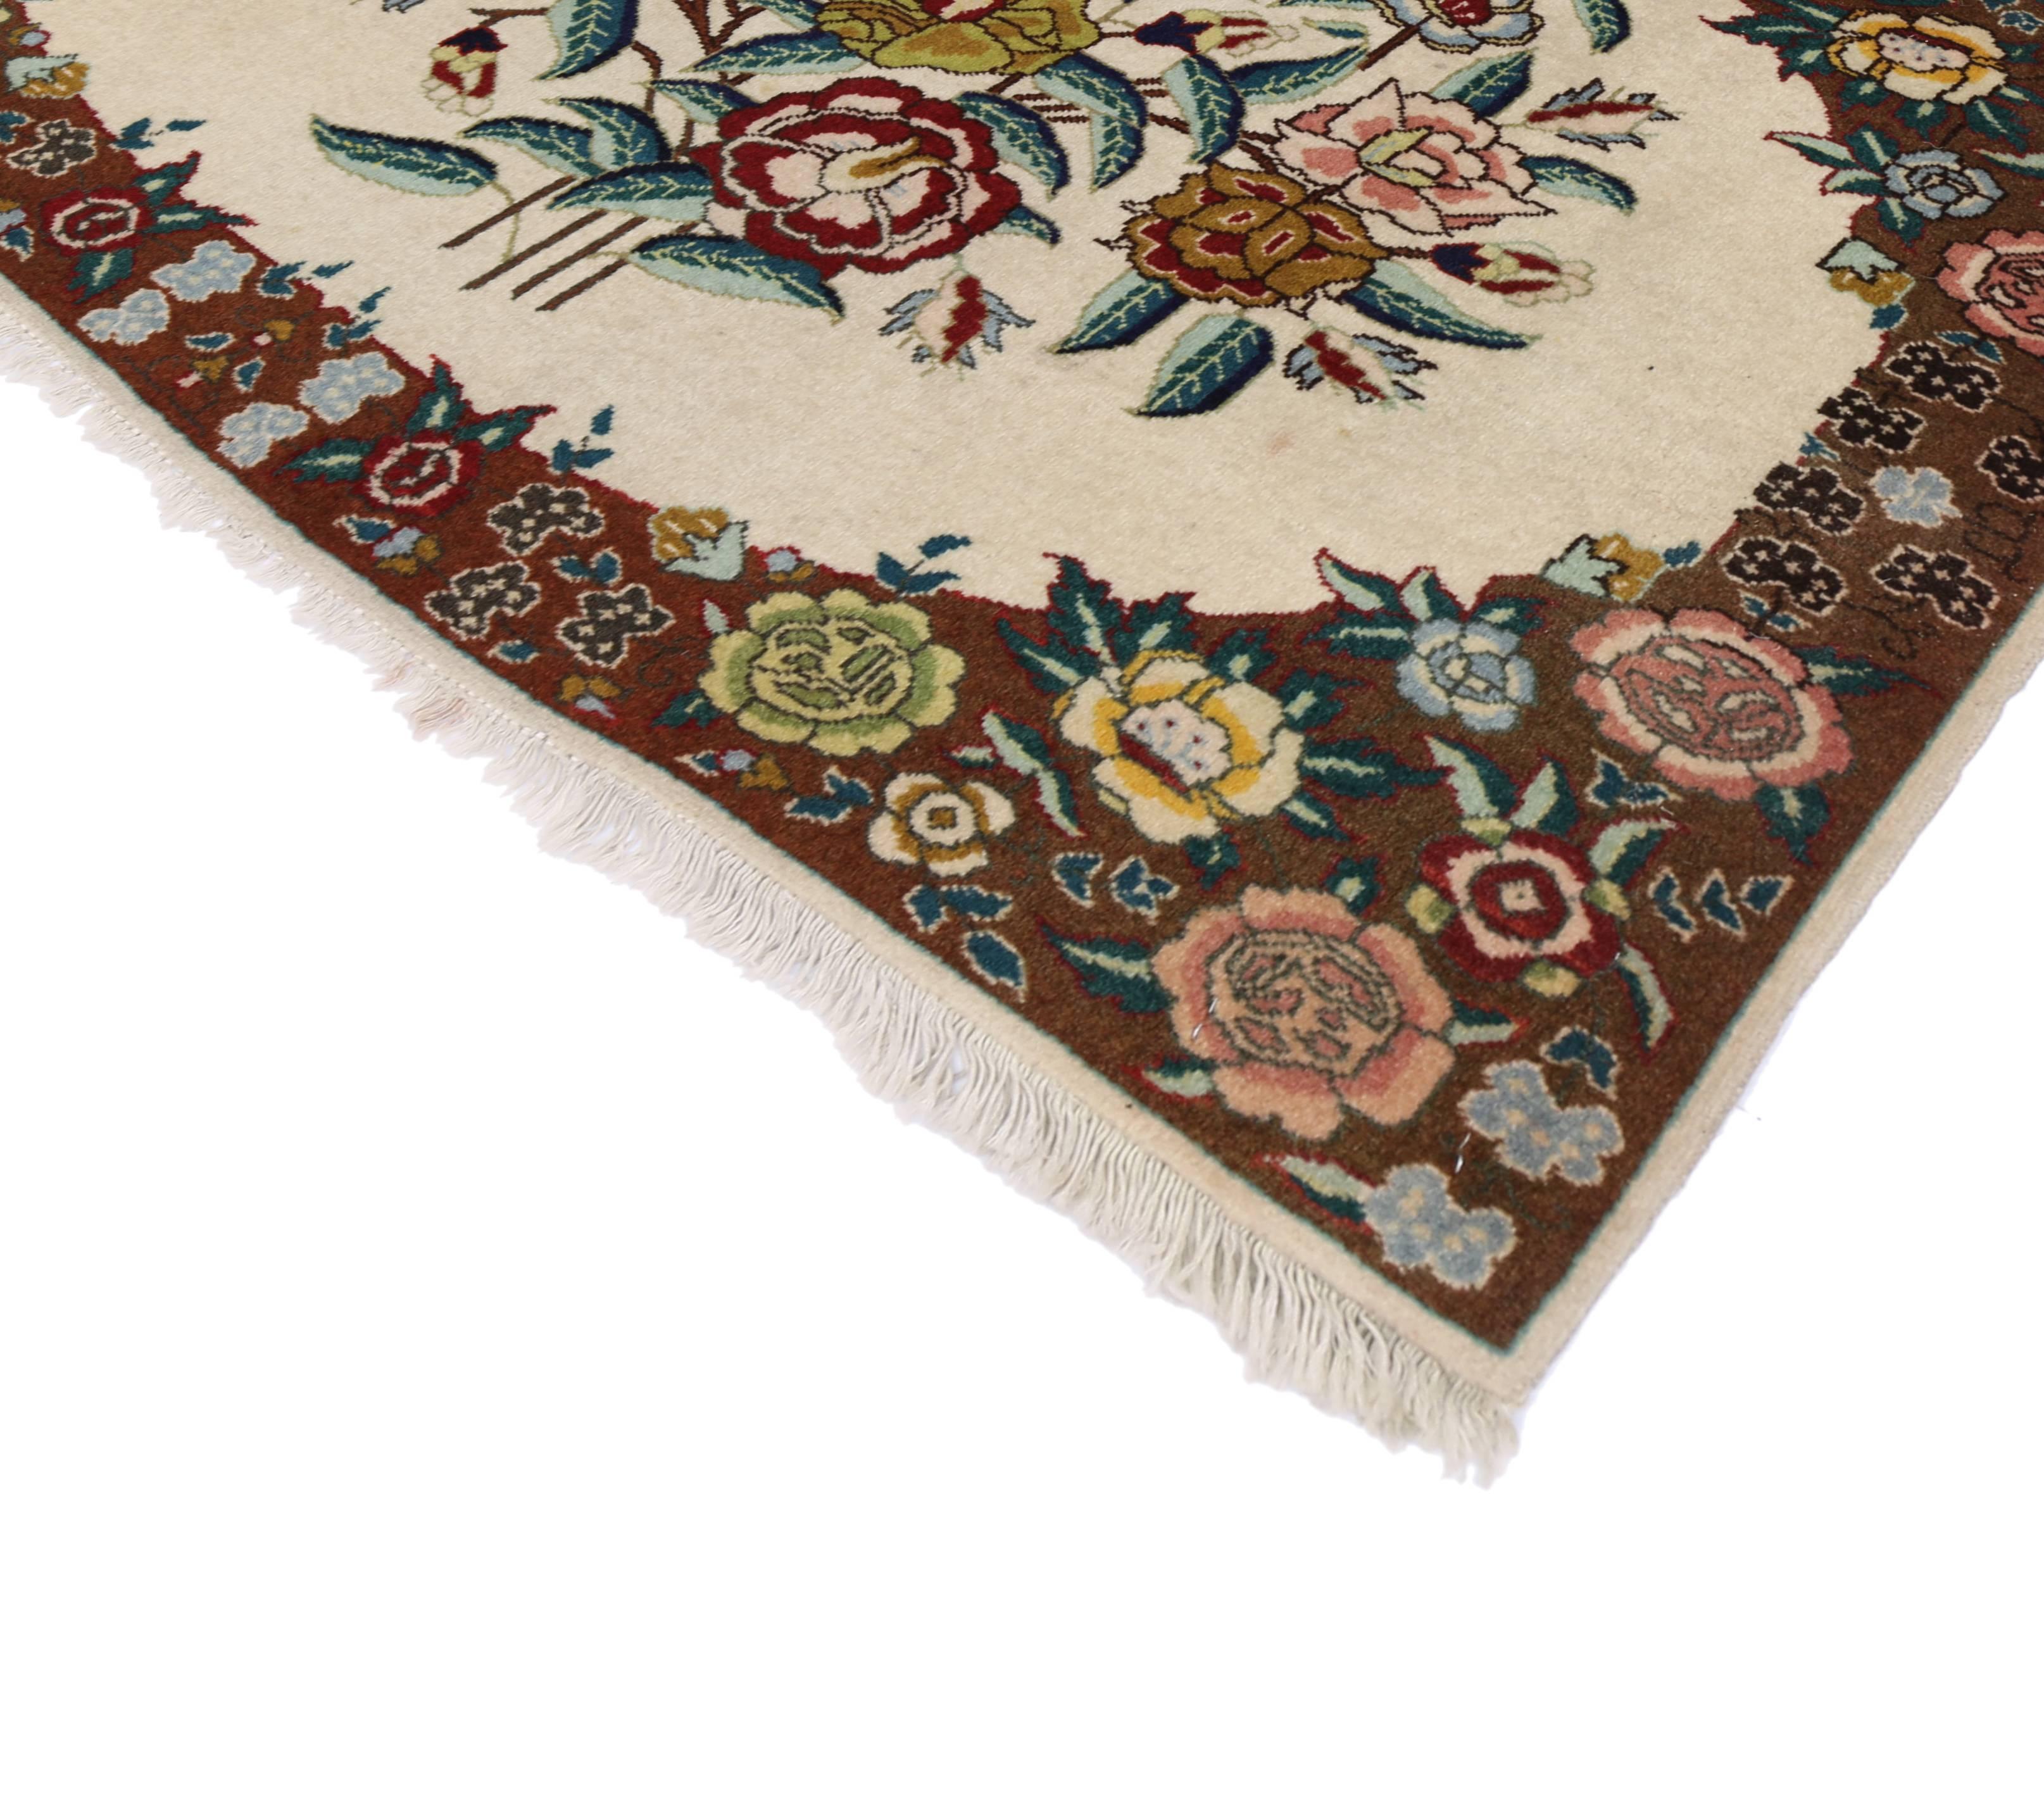 75654, vintage Persian Tabriz rug with traditional style. This hand-knotted wool vintage Persian Tabriz rug features a floral bouquet in a creamy vanilla field surrounded by a complementary floral border creating a well-balanced and timeless design.